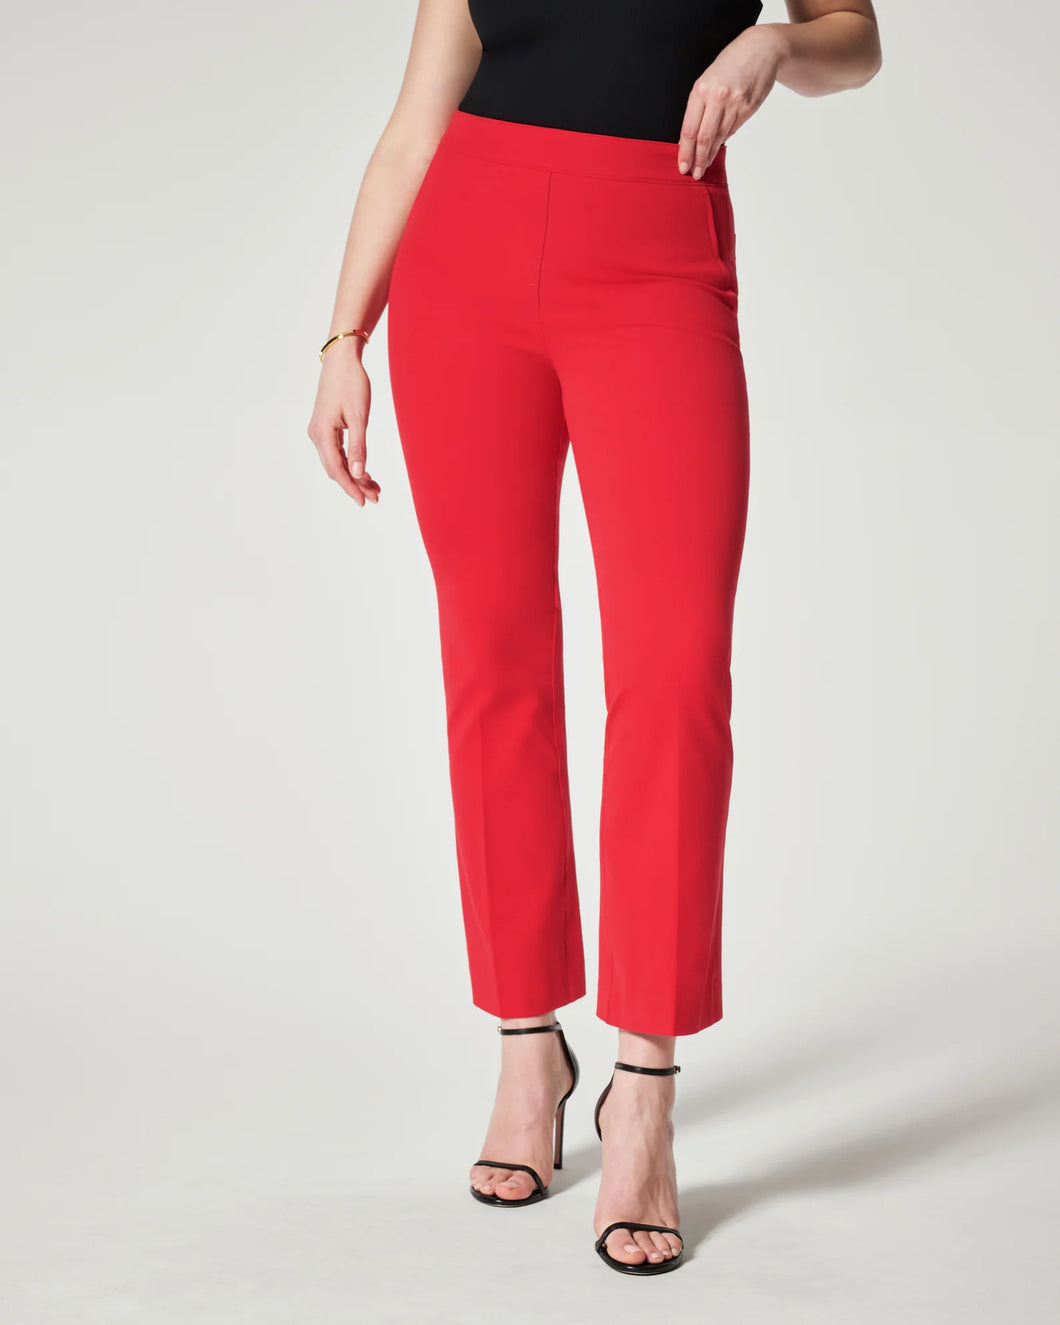 Spanx- On-the-Go Kick Flare Pant True Red-20367R